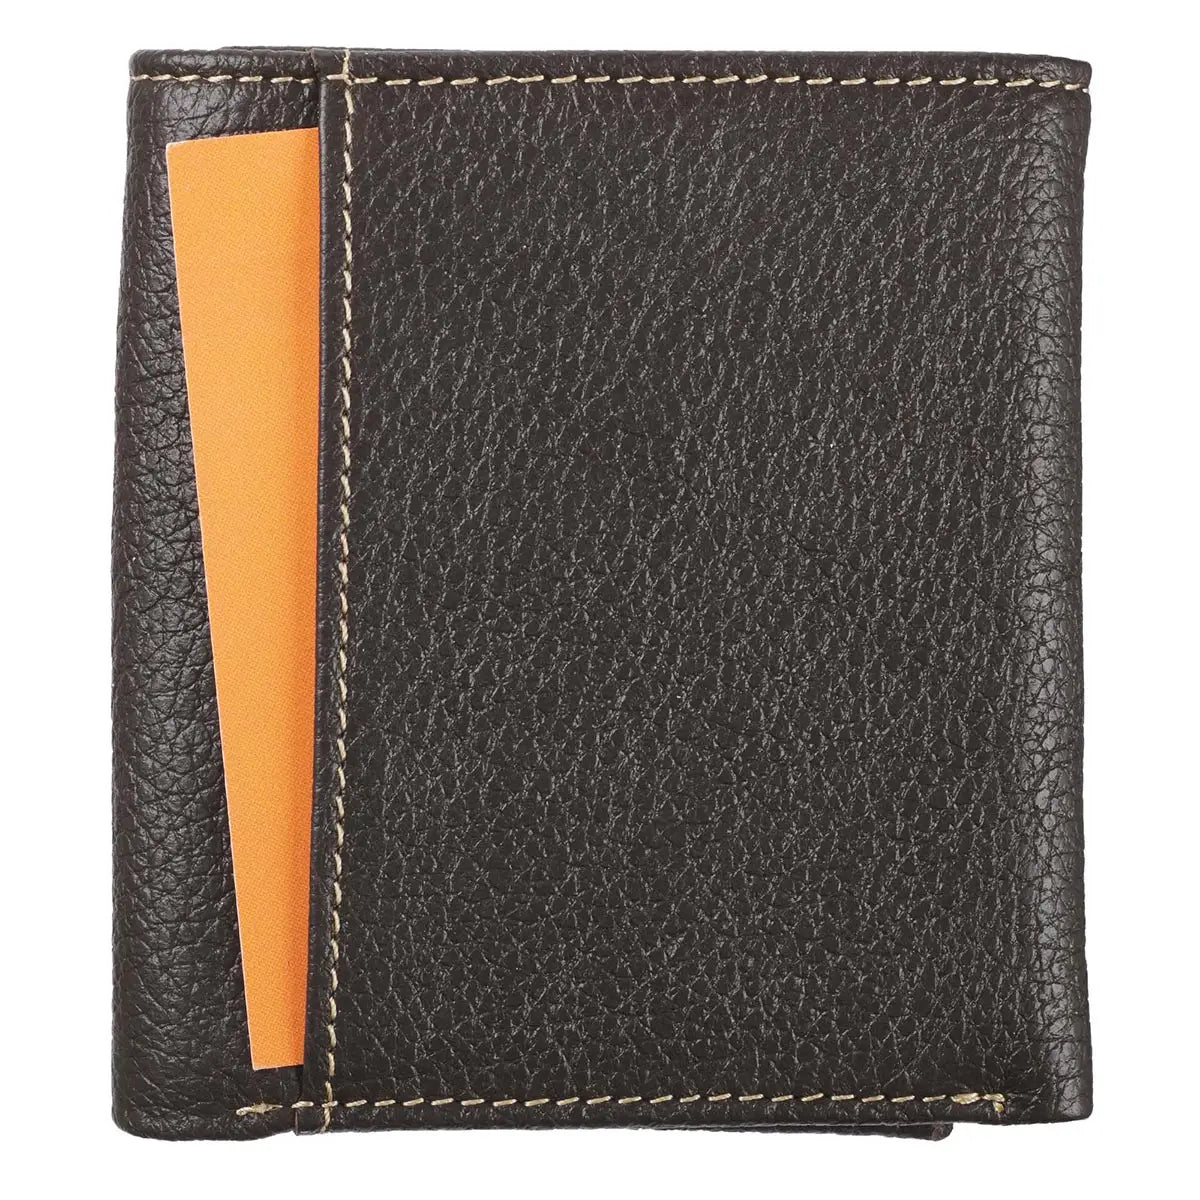 Three Crosses Leather Wallet